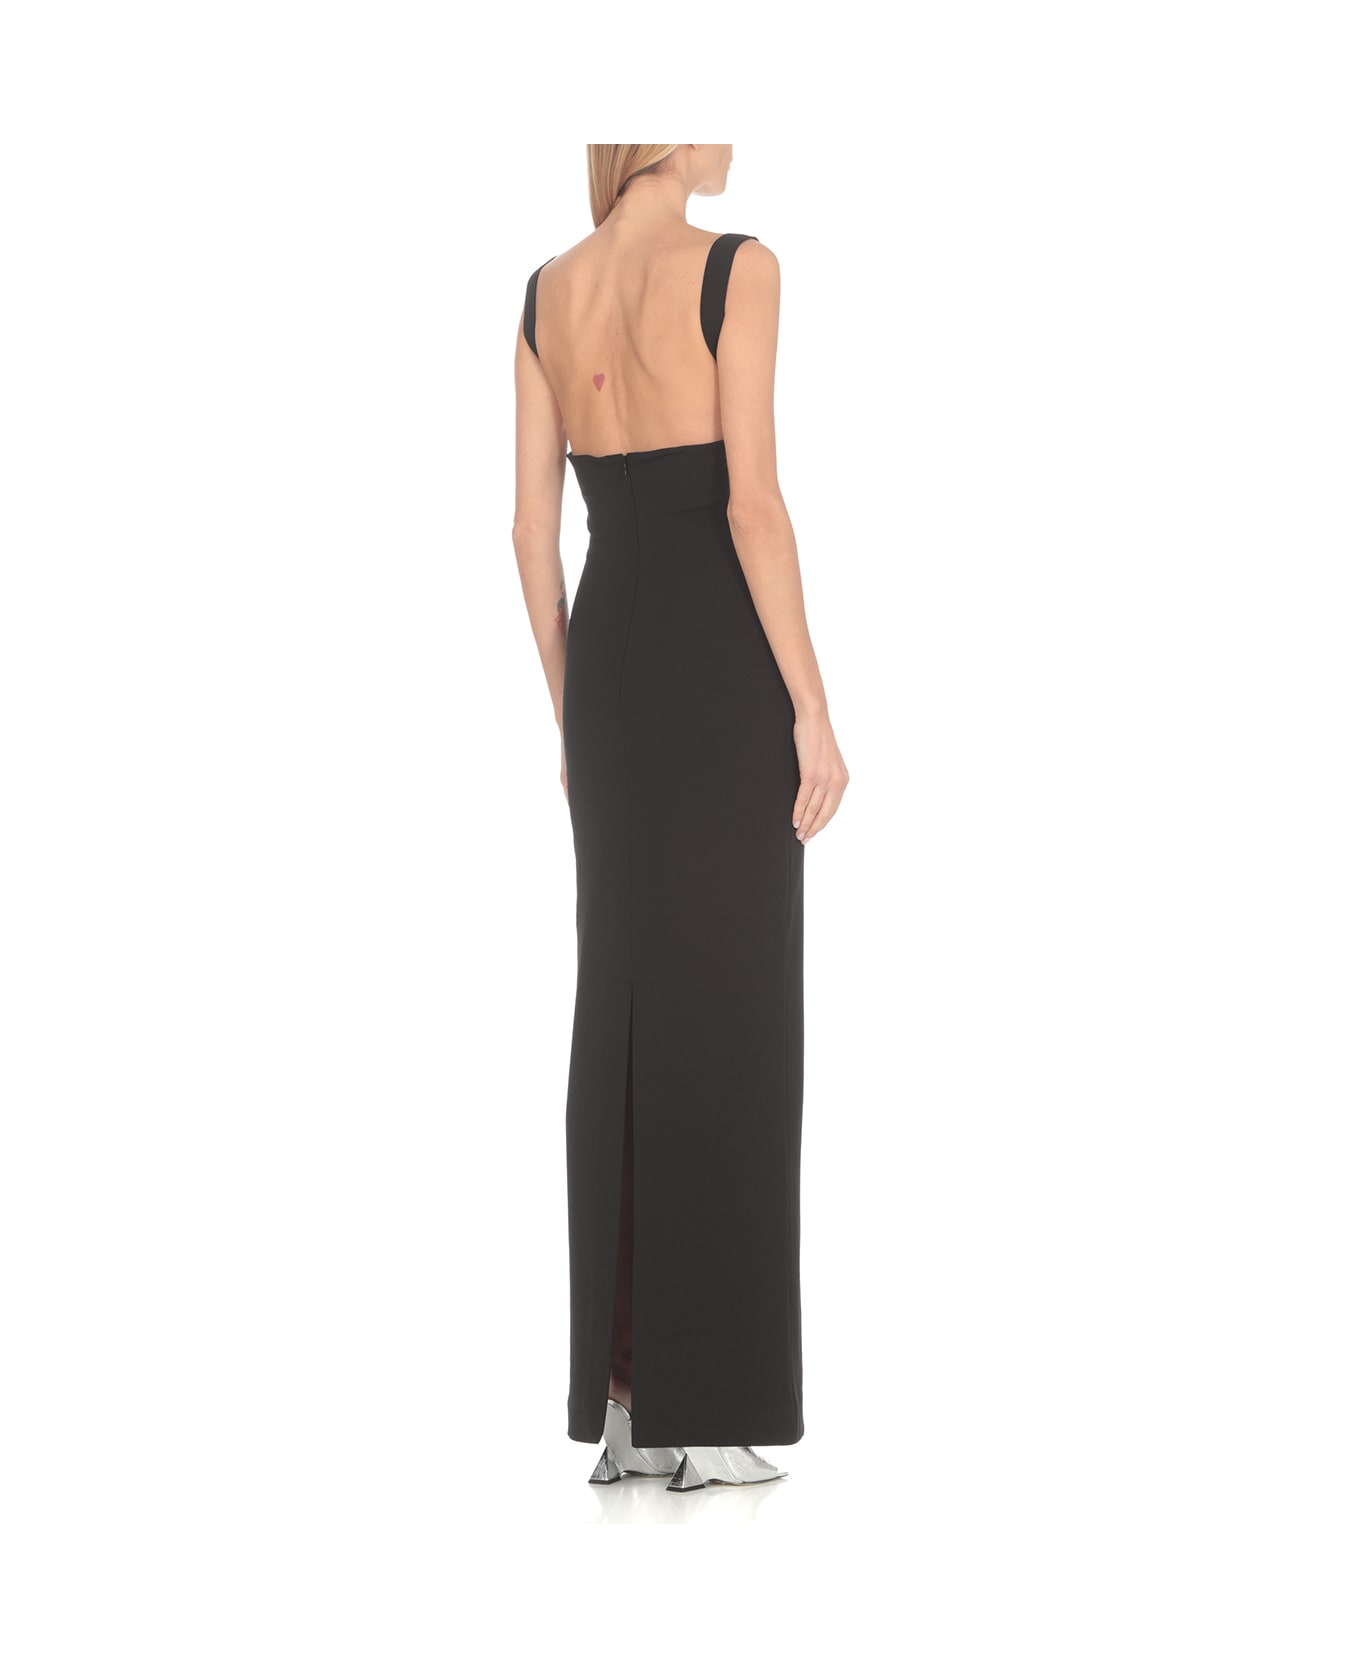 Solace London 'joni' Black Maxi Dress With Square Neck And Open Back Woman - Black ワンピース＆ドレス